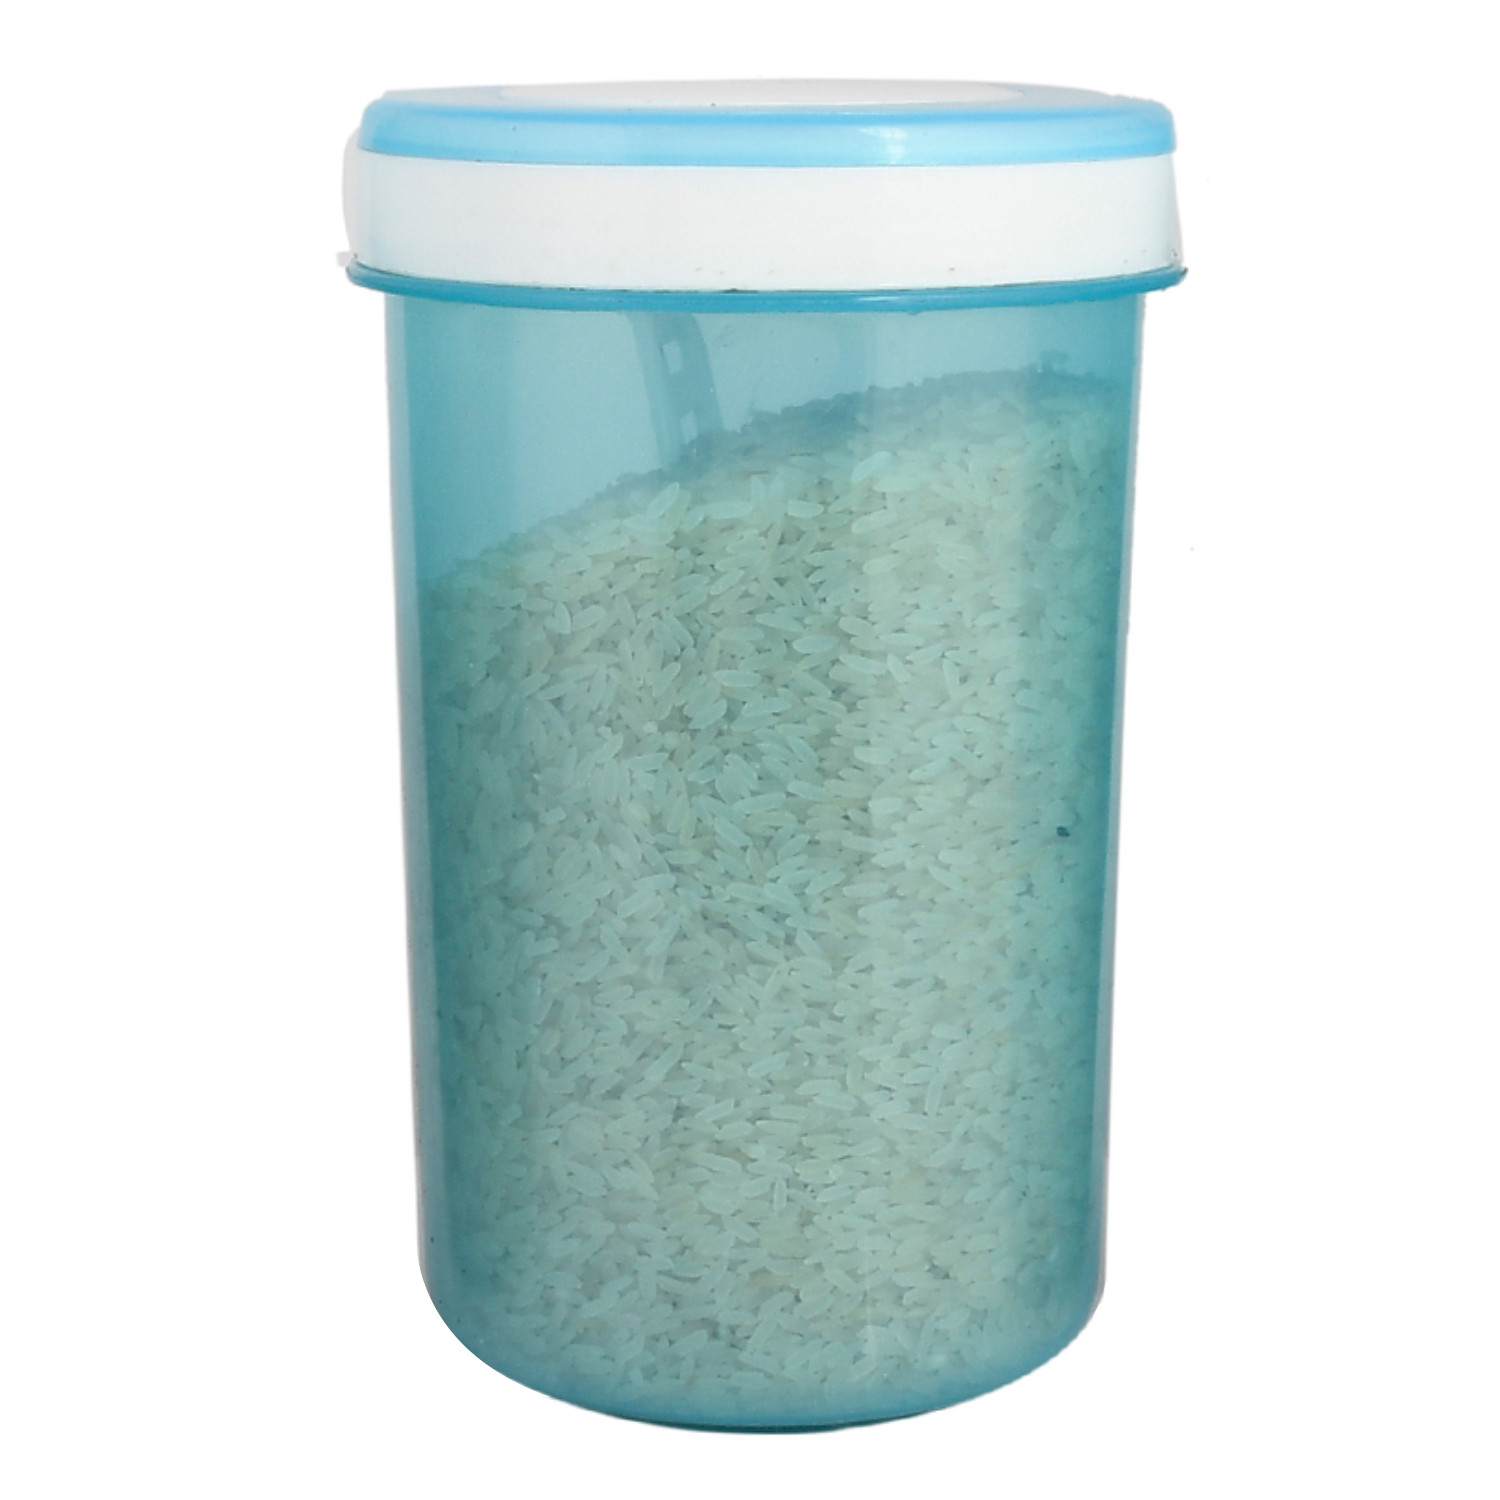 Kuber Industries Containers Set for Kitchen|BPA-Free Plastic Storage Containers Set|Kitchen Storage Containers|Grocery Containers with Spoon|SPICY 2000 ML| (Sky Blue)